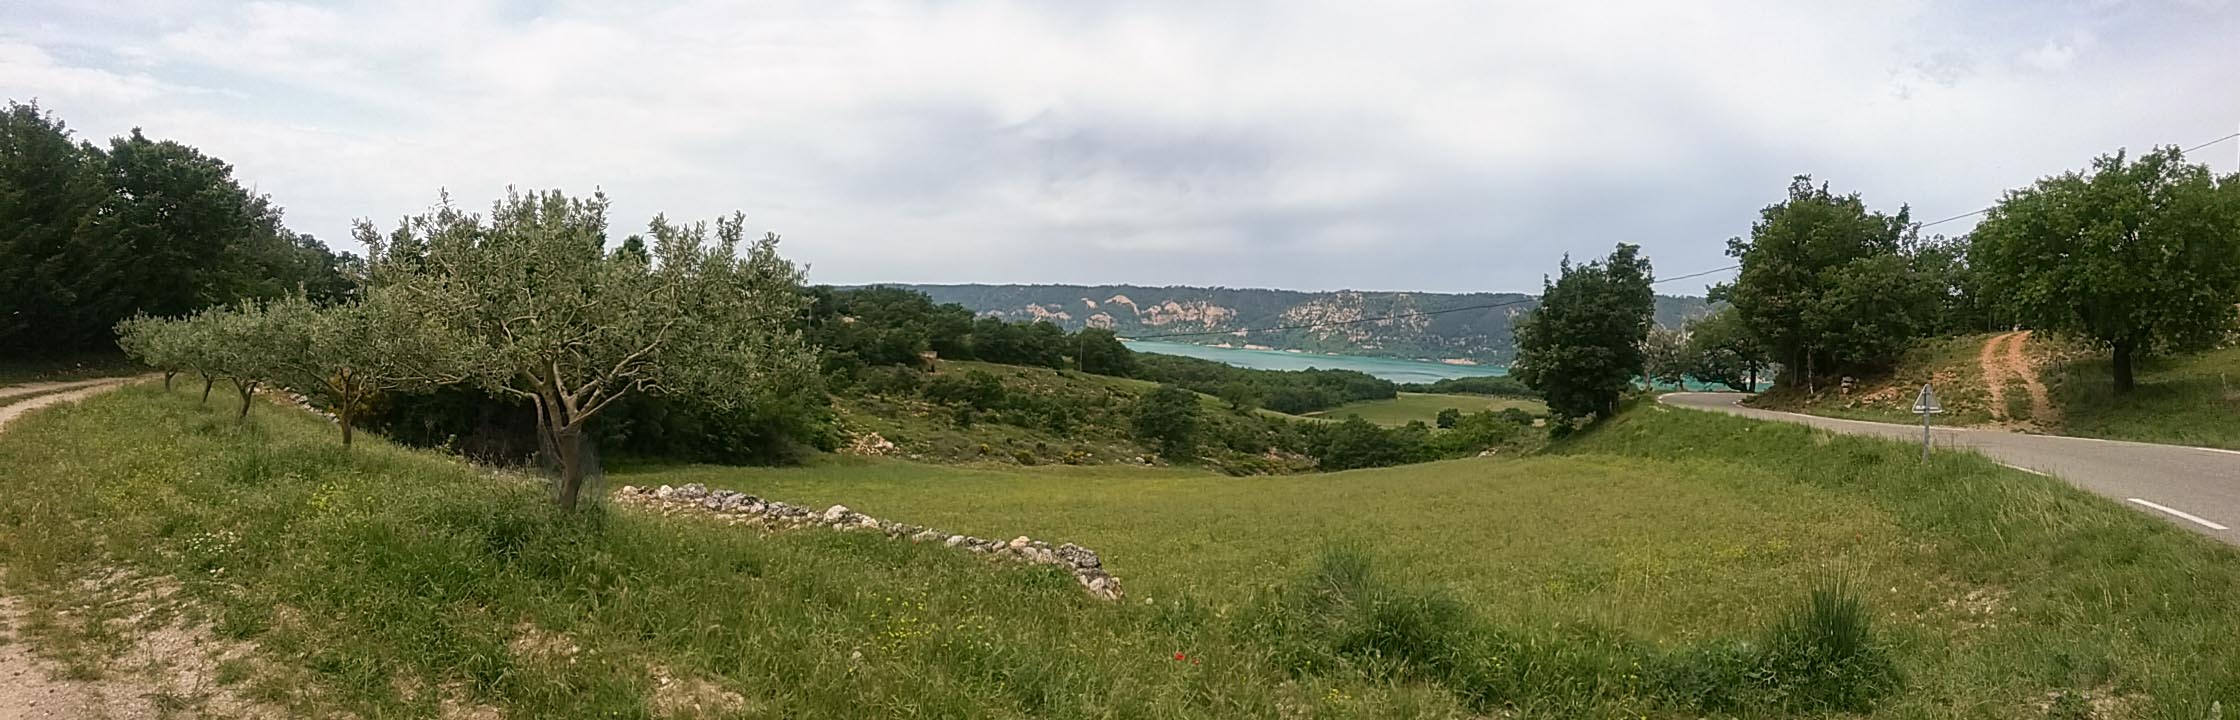 2018 05 Provence PanoramaTablet 002